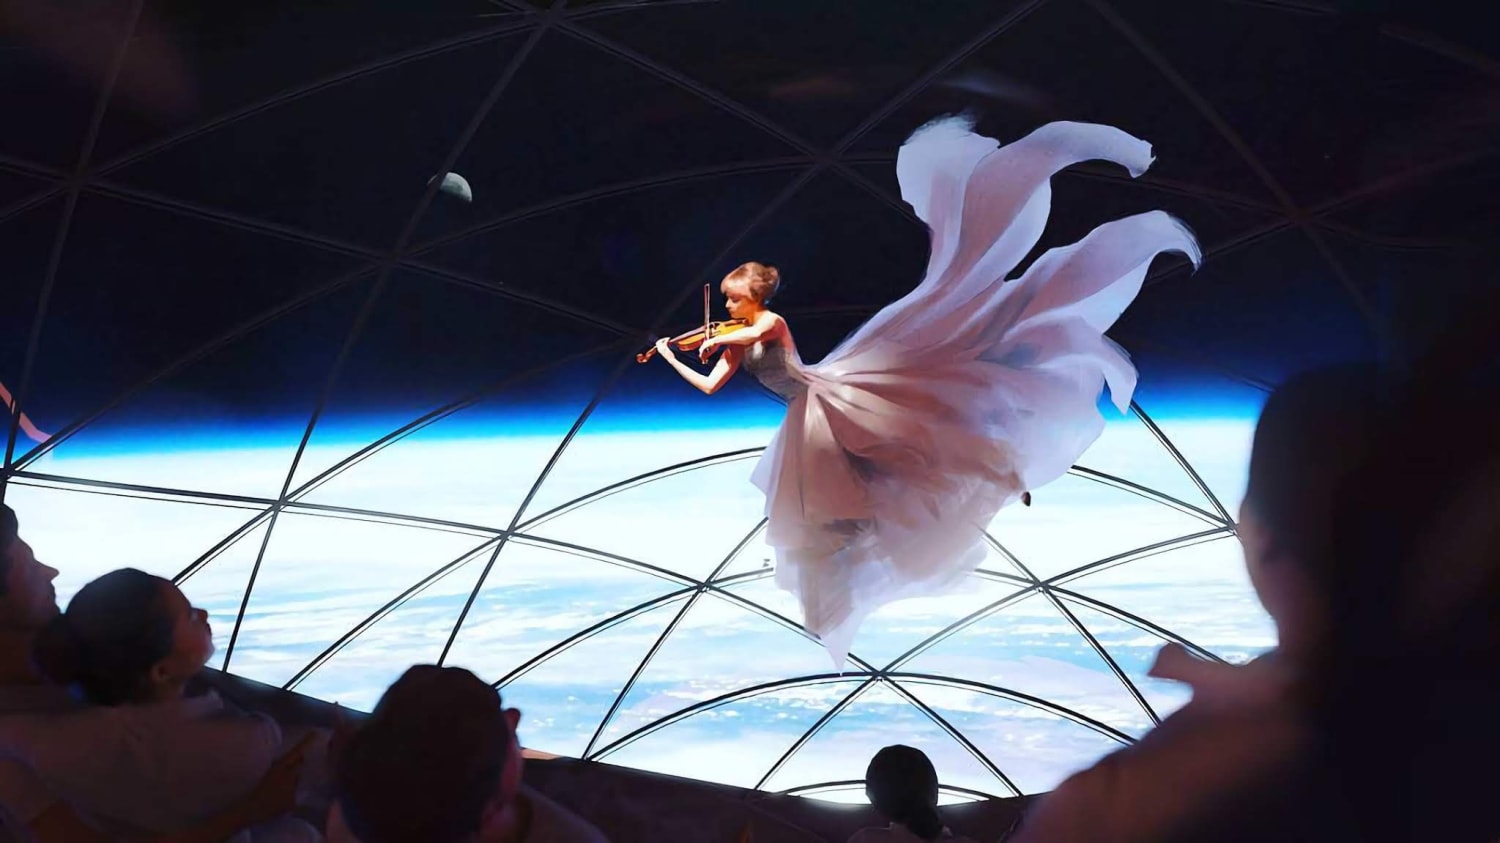 SPACEX STARSHIP: ELON MUSK ENVISIONS MUSICAL PERFORMANCES IN ZERO GRAVITY